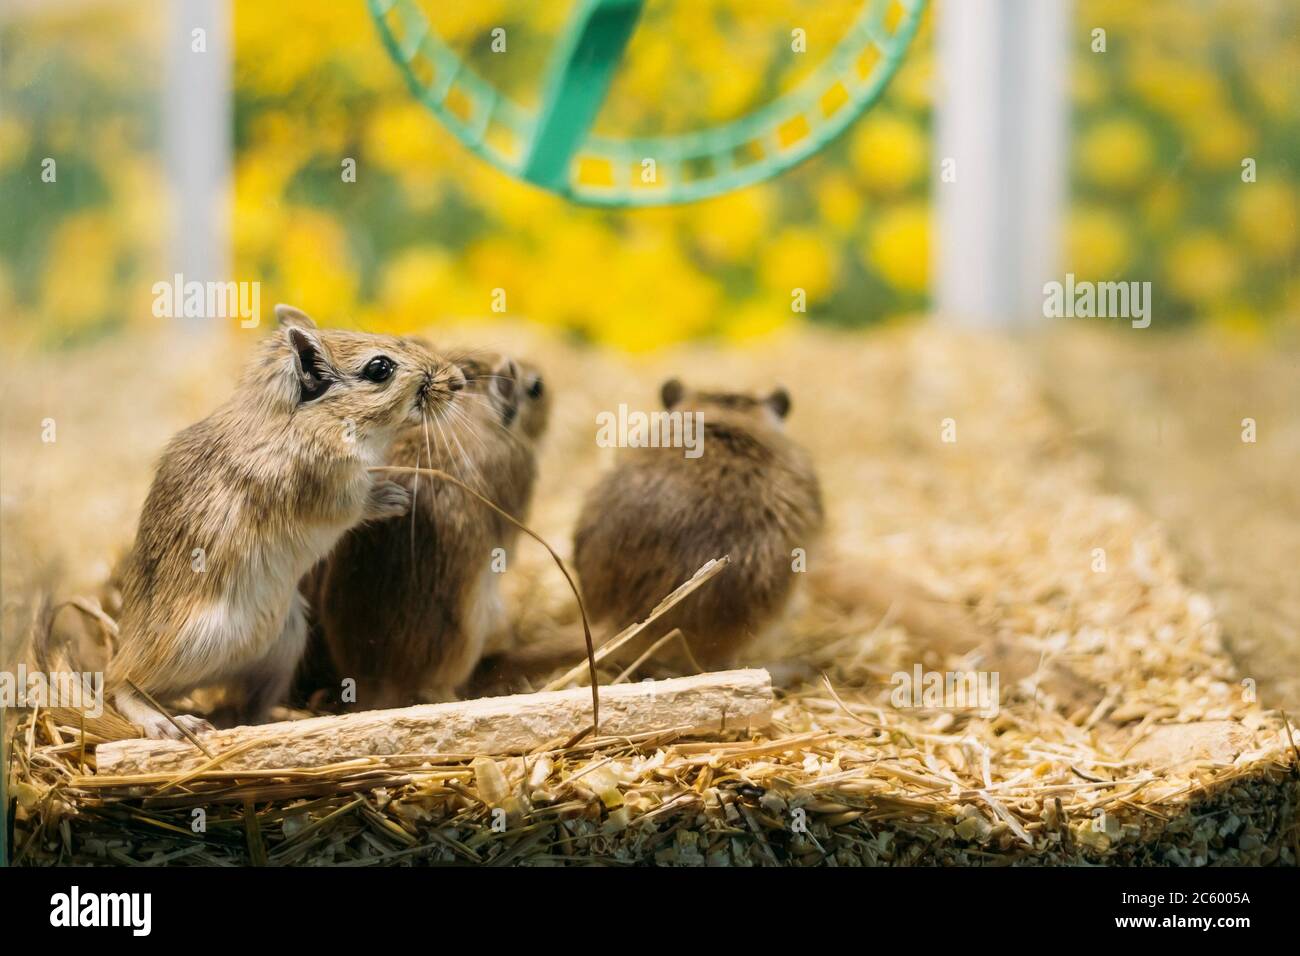 Meriones unguiculatus, the Mongolian jird or Mongolian gerbil is a rodent belonging to subfamily Gerbillinae. Stock Photo